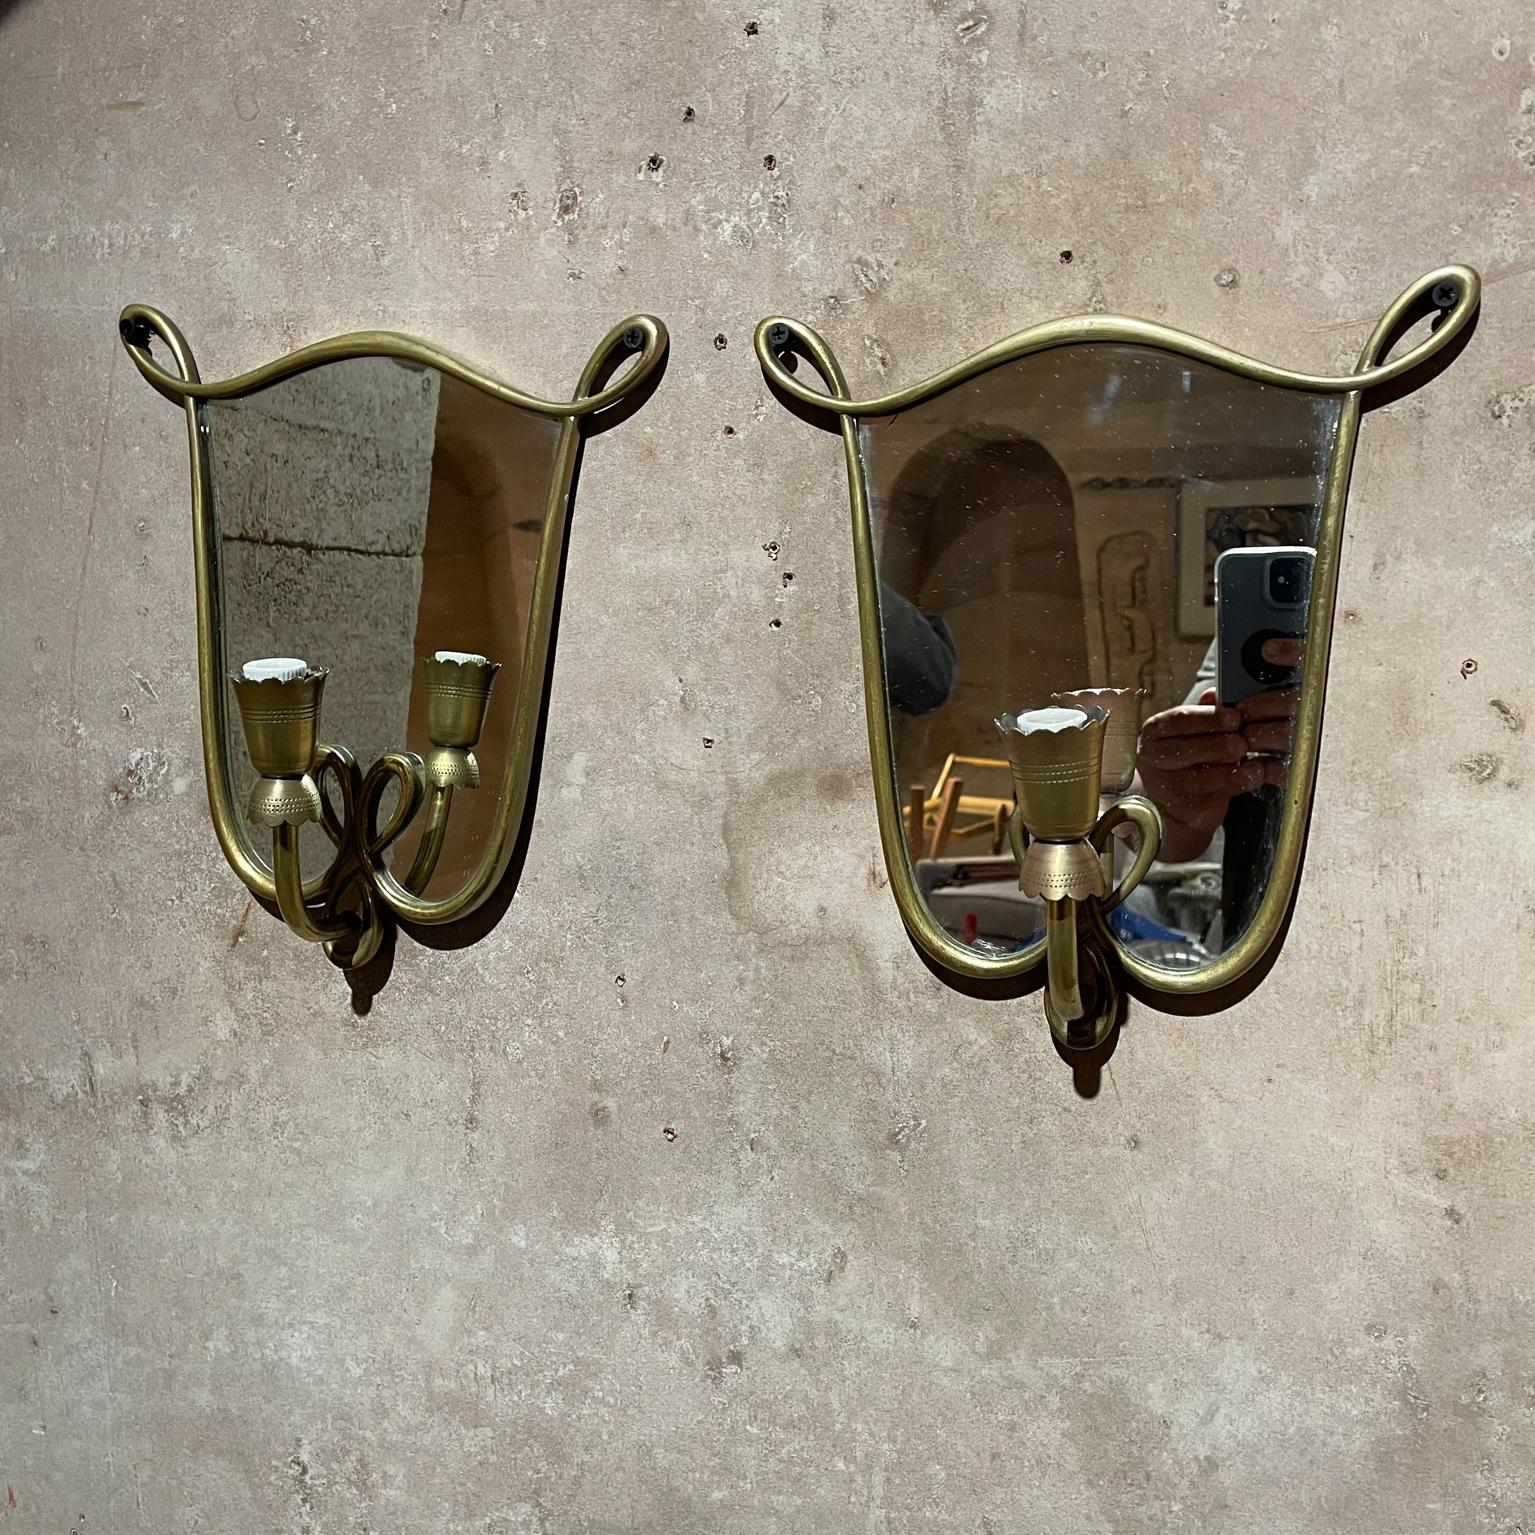 Wall sconces
So beautiful!! Pretty Italian wall sconces in the style of GIo Ponti. 
Swirled ribbon frame in bronze with antique vintage mirror, Italy 1950s.
Lovely scalloped edge perforated design.
Unmarked.
Measures: 11 tall x 10 D x 4